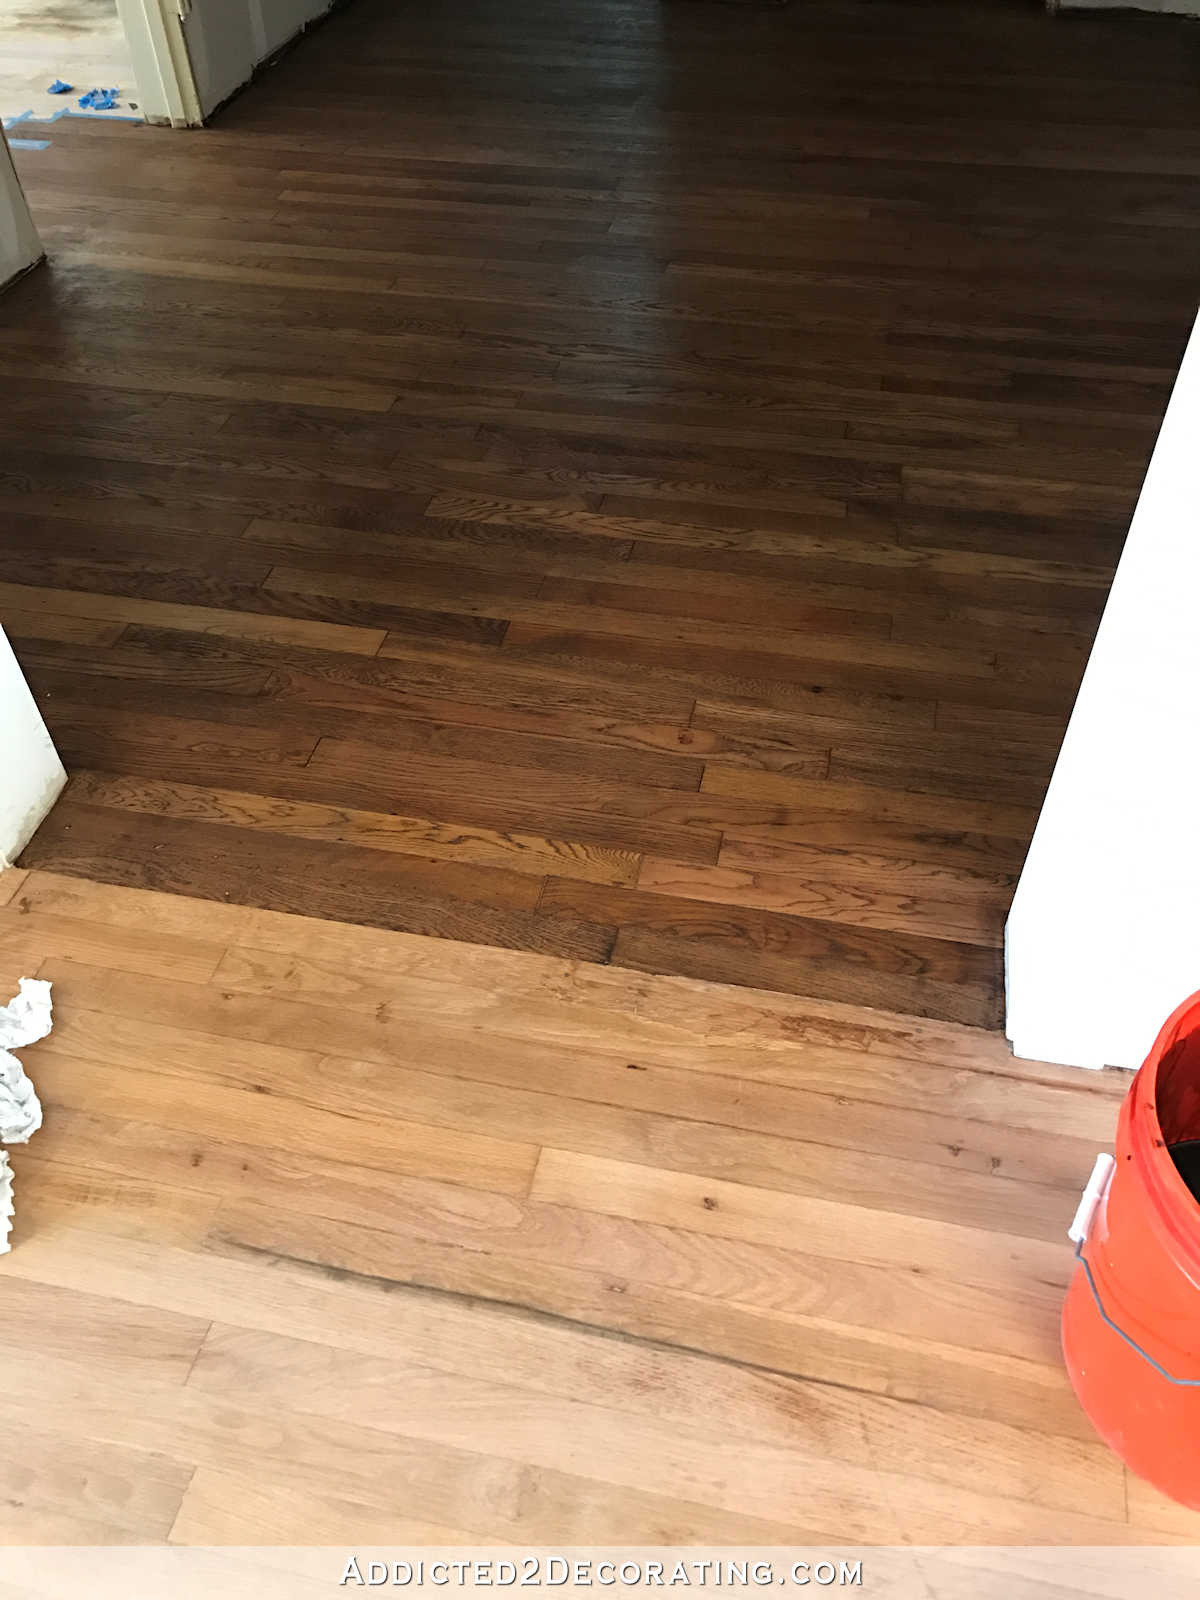 9 16 Hardwood Flooring Of Adventures In Staining My Red Oak Hardwood Floors Products Process In Staining Red Oak Hardwood Floors 2 Tape Off One Section at A Time for